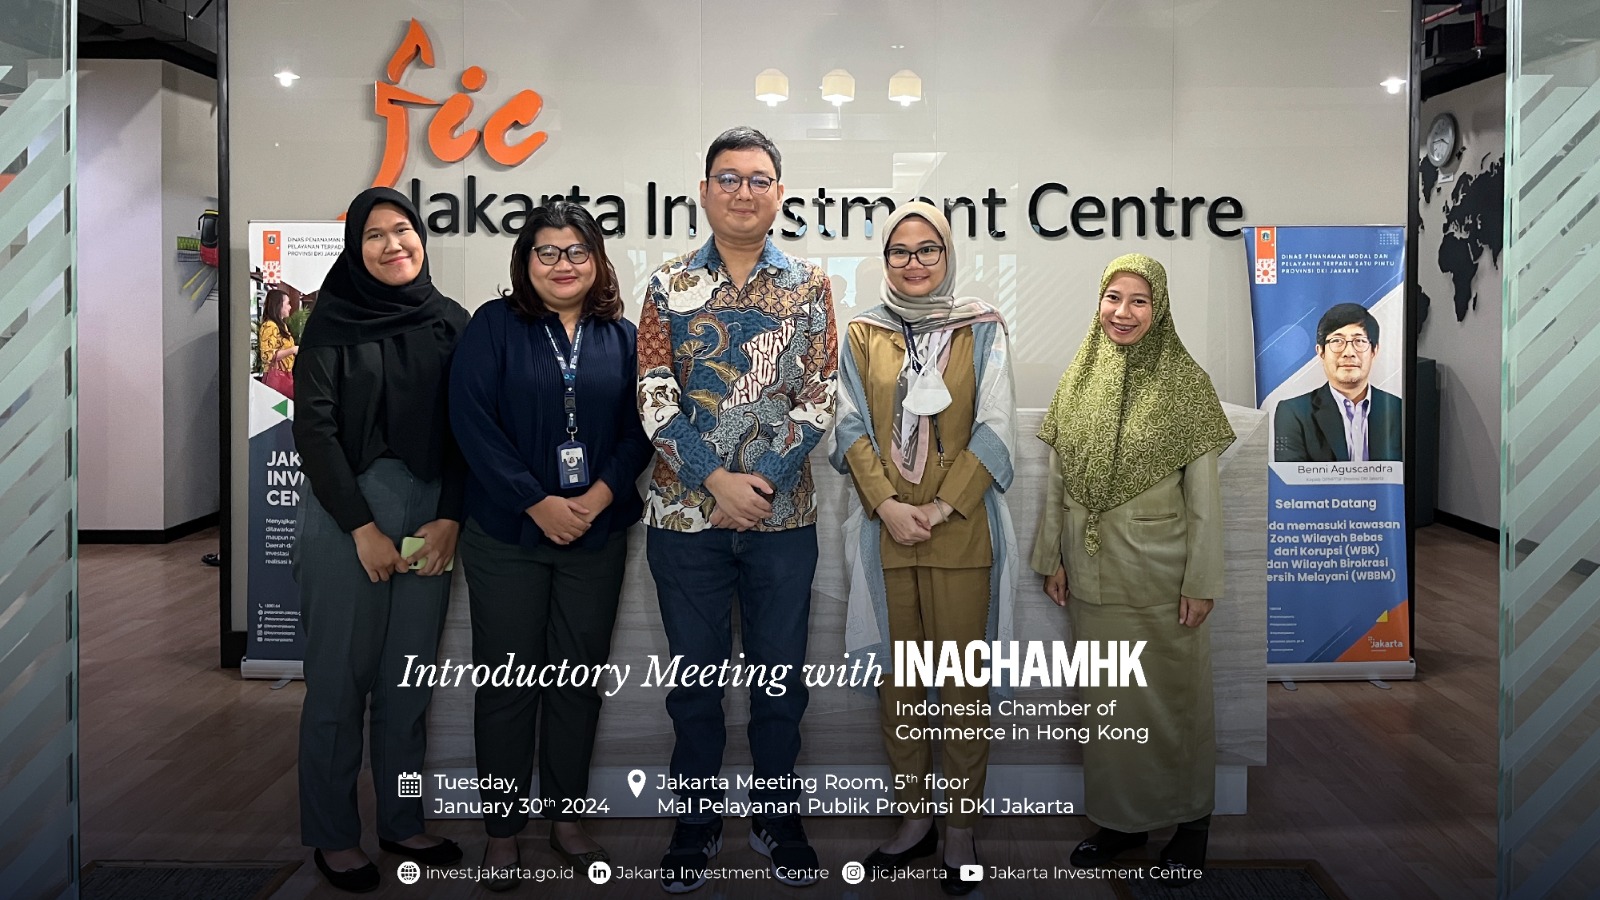 Introductory Meeting with INACHAMHK